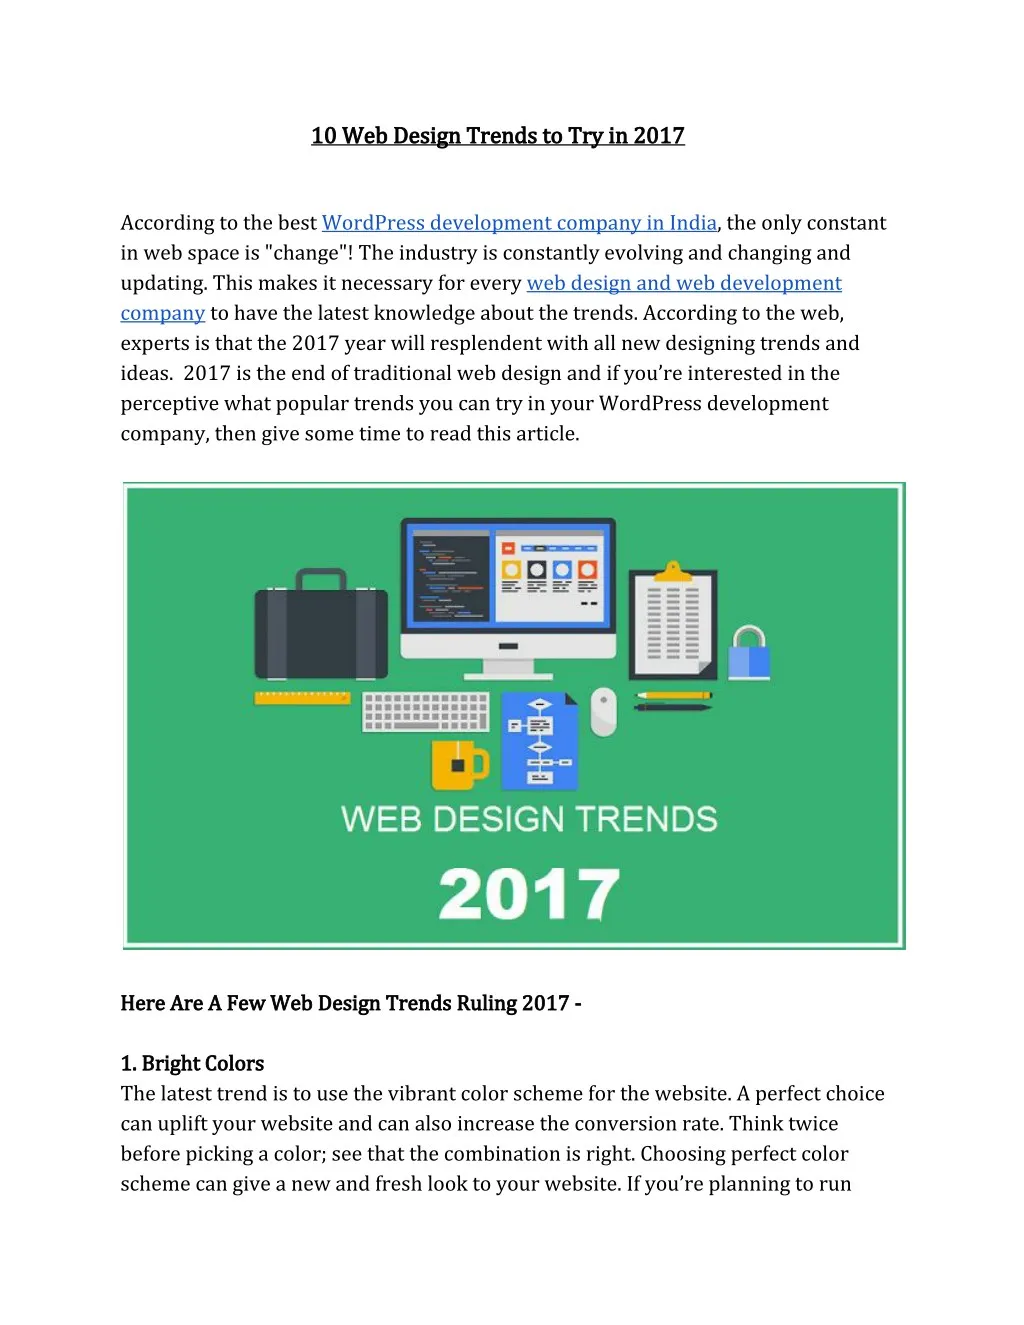 10 web design trends to try in 2017 10 web design